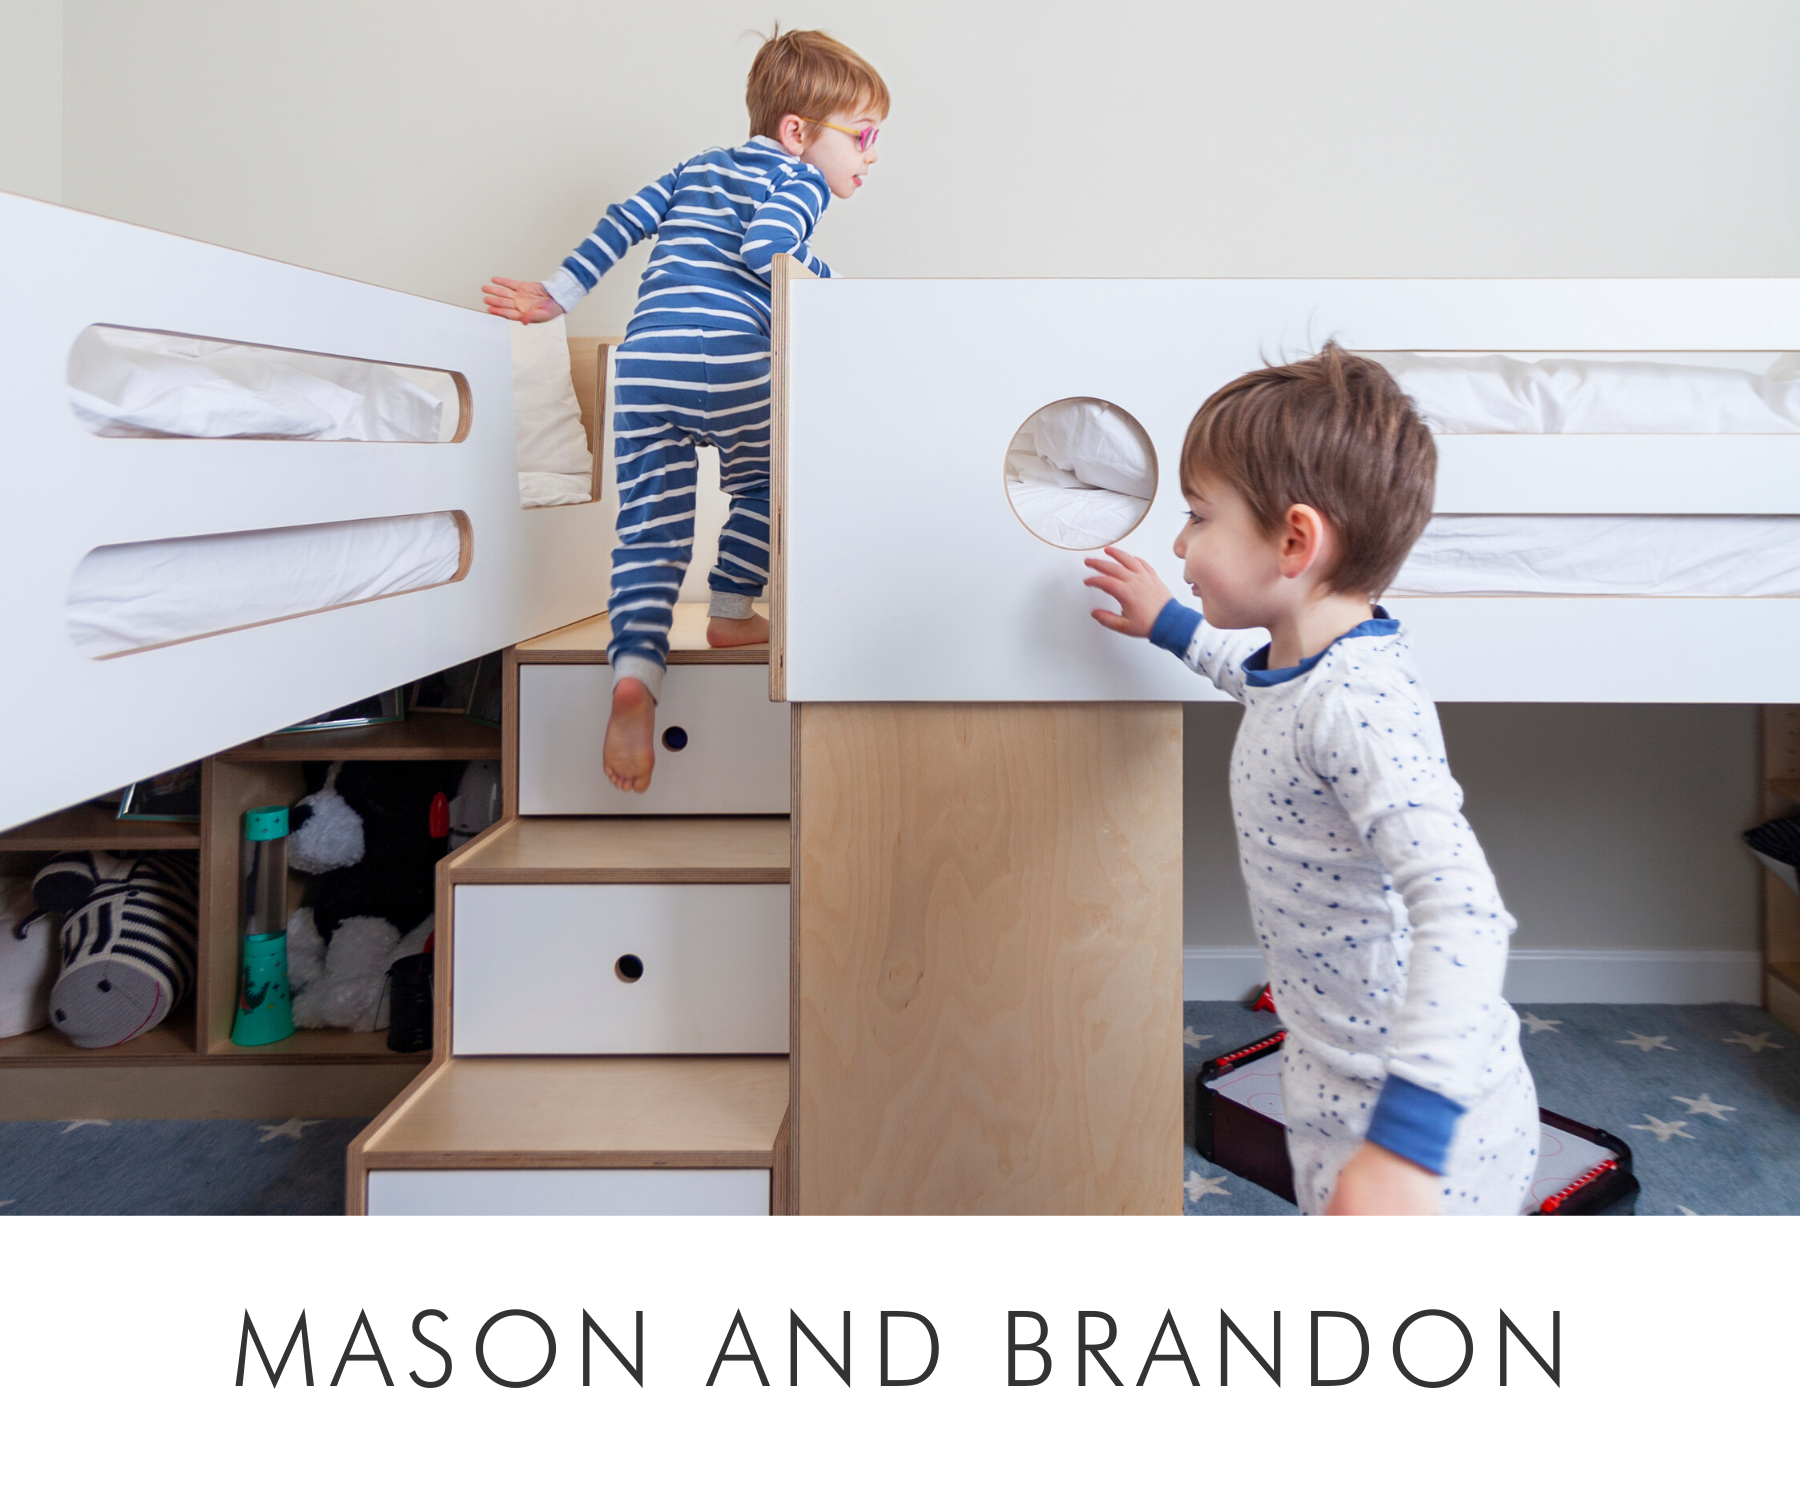 Two young boys playing in a room with a white bunk bed and built-in wooden storage.